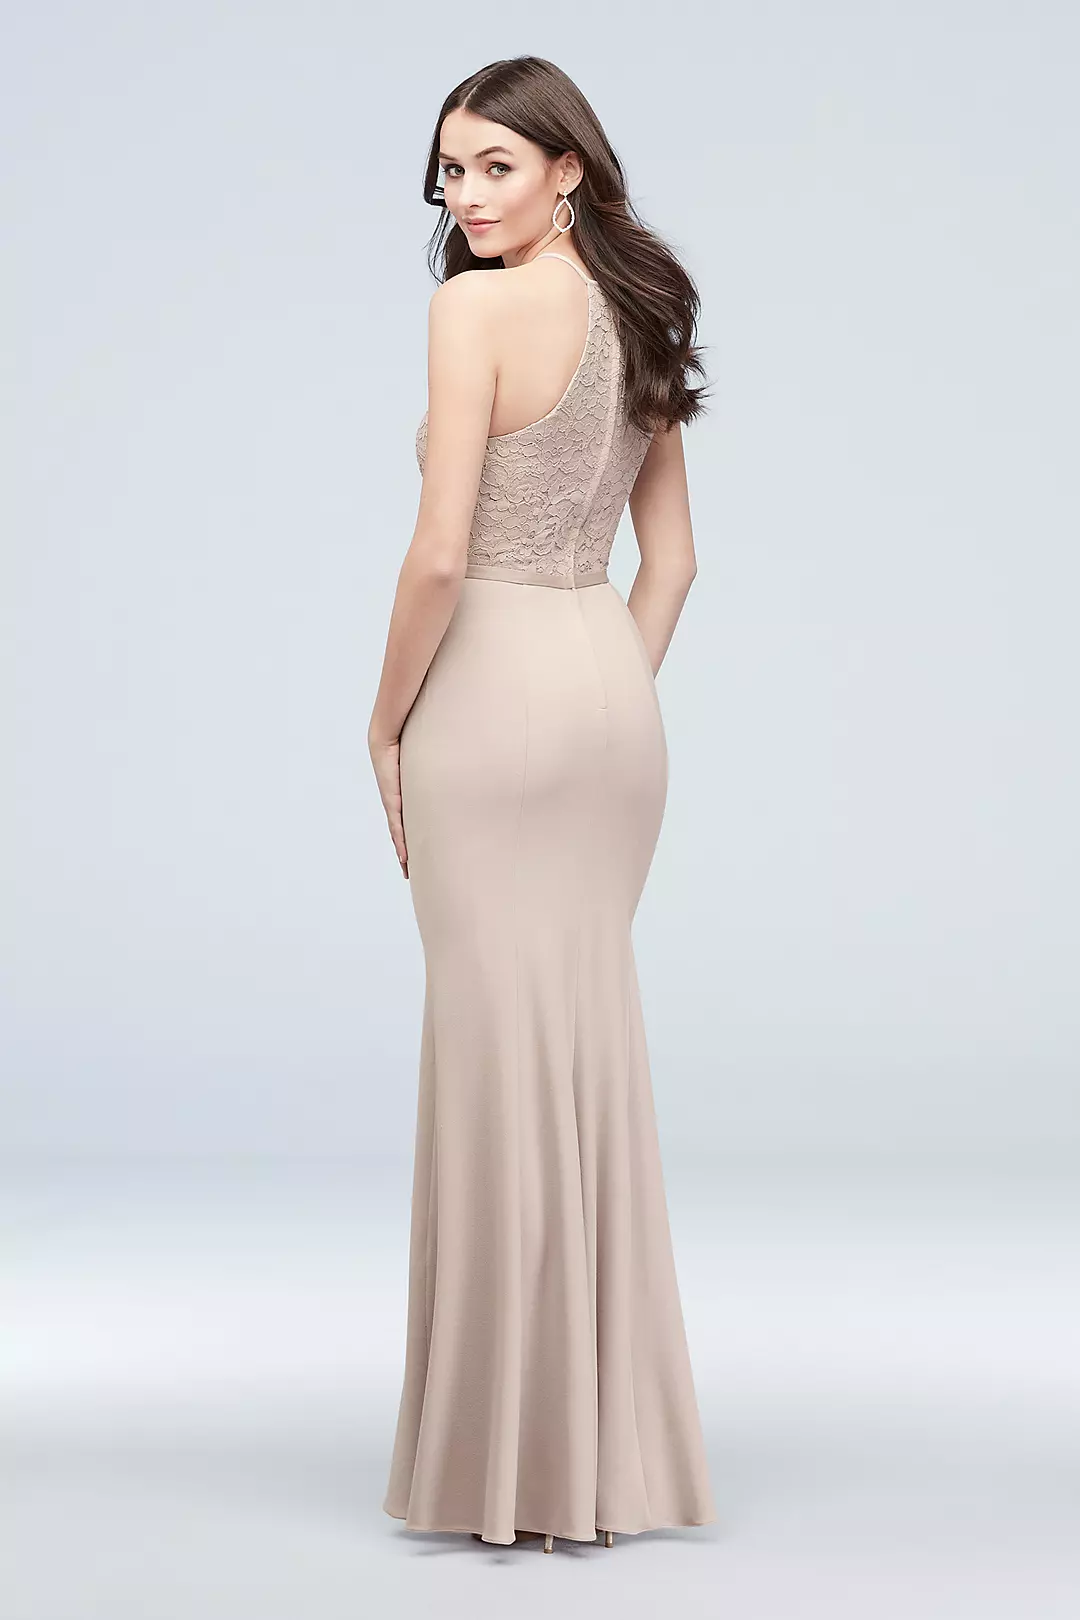 Lace and Stretch Crepe High-Neck Bridesmaid Dress Image 3